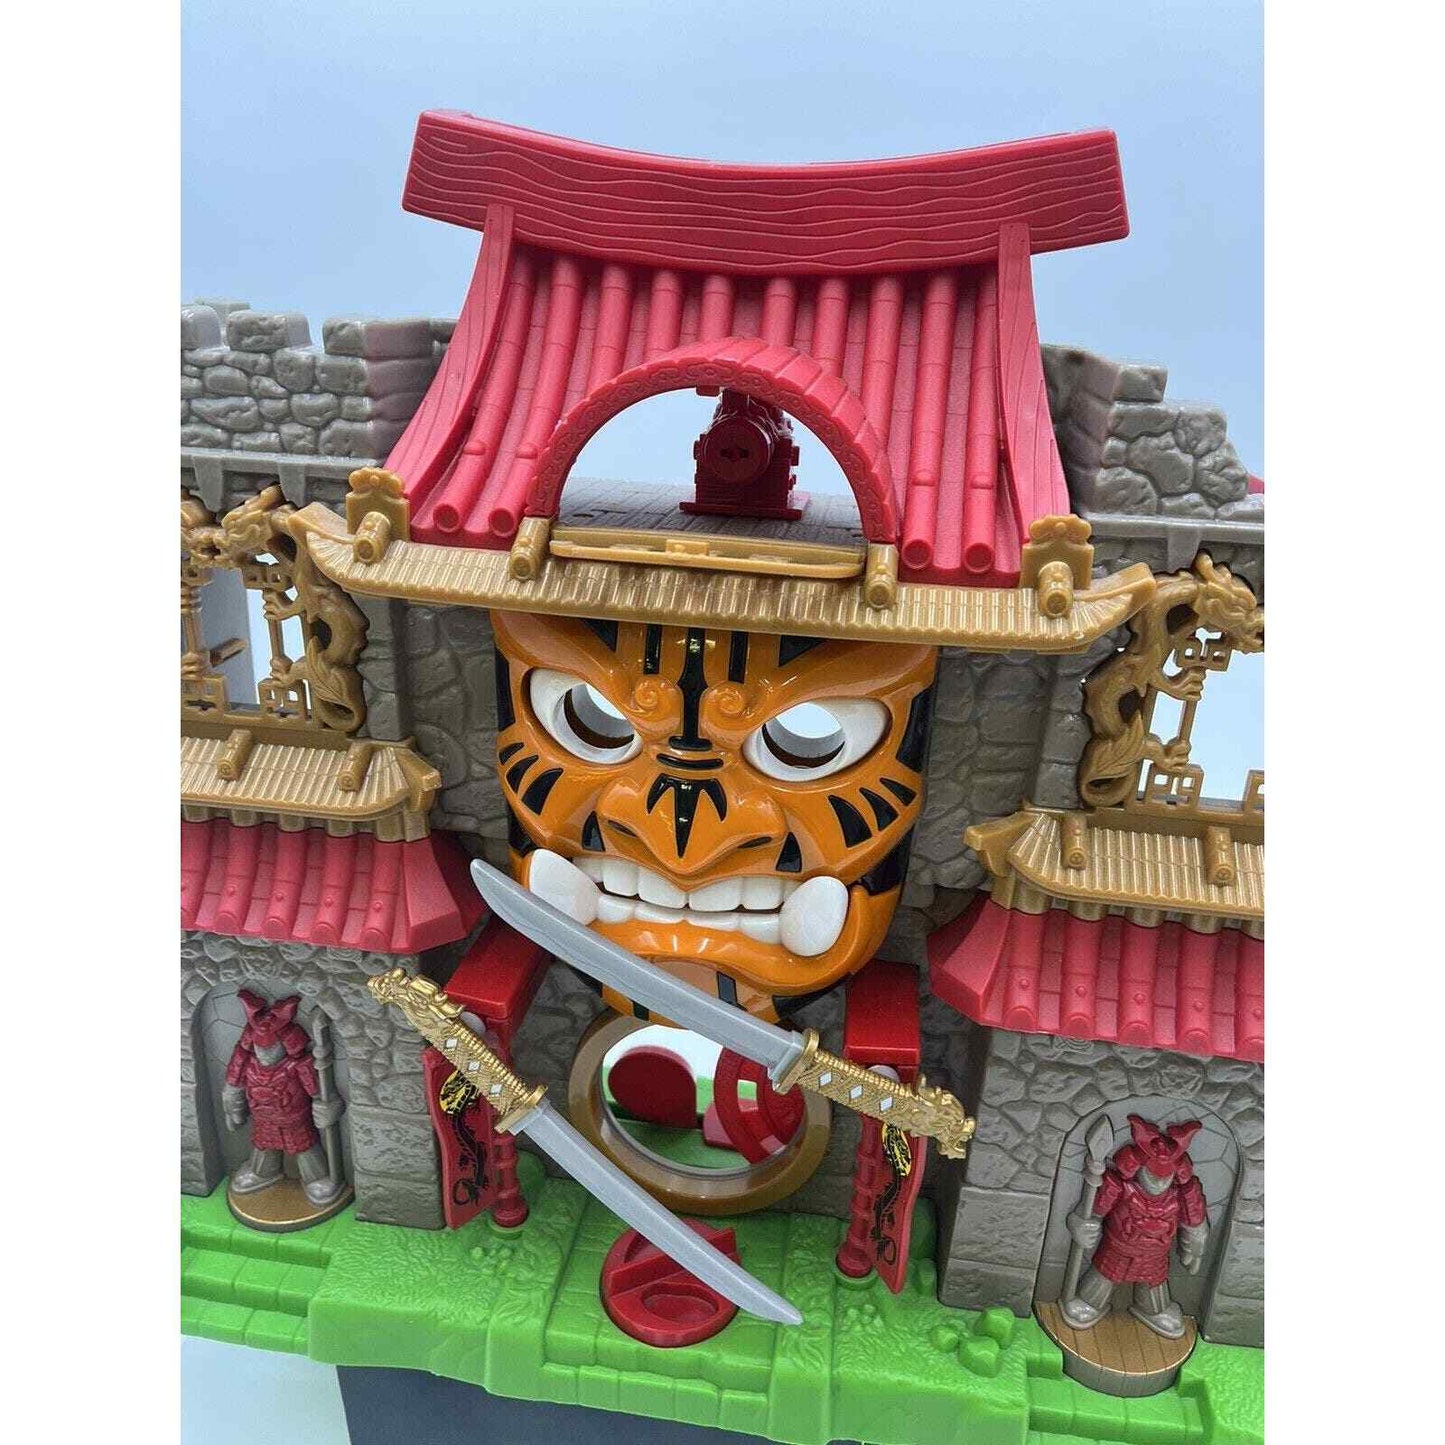 Fisher-Price IMAGINEXT SAMURAI CASTLE red Feudal Japan 2011 Toy-l W/ Figures